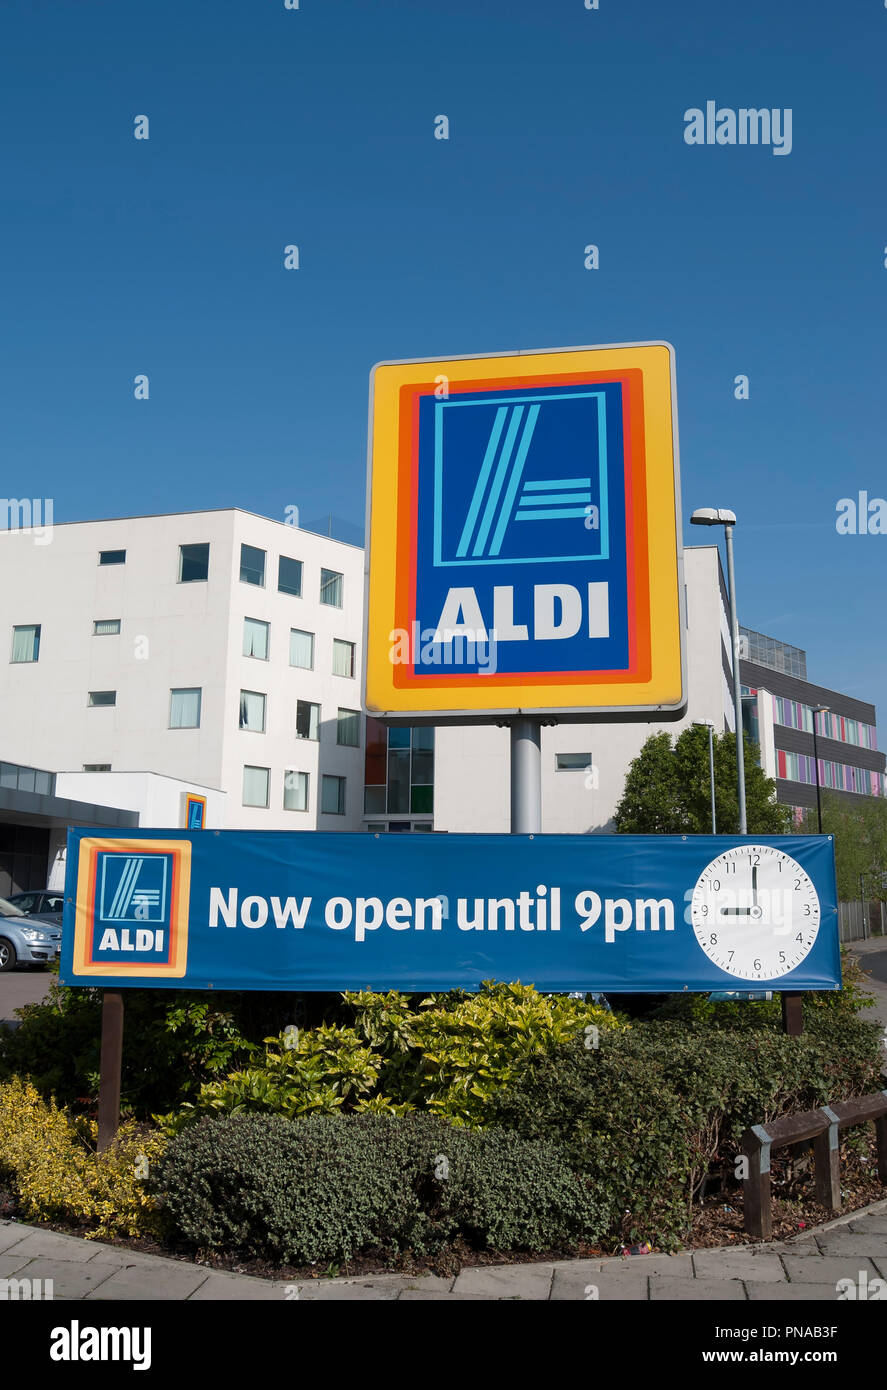 sign with name and logo of aldi, at a branch of the supermarket chain in hounslow, middlesex, england, with further sigh stating now open until 9pm Stock Photo